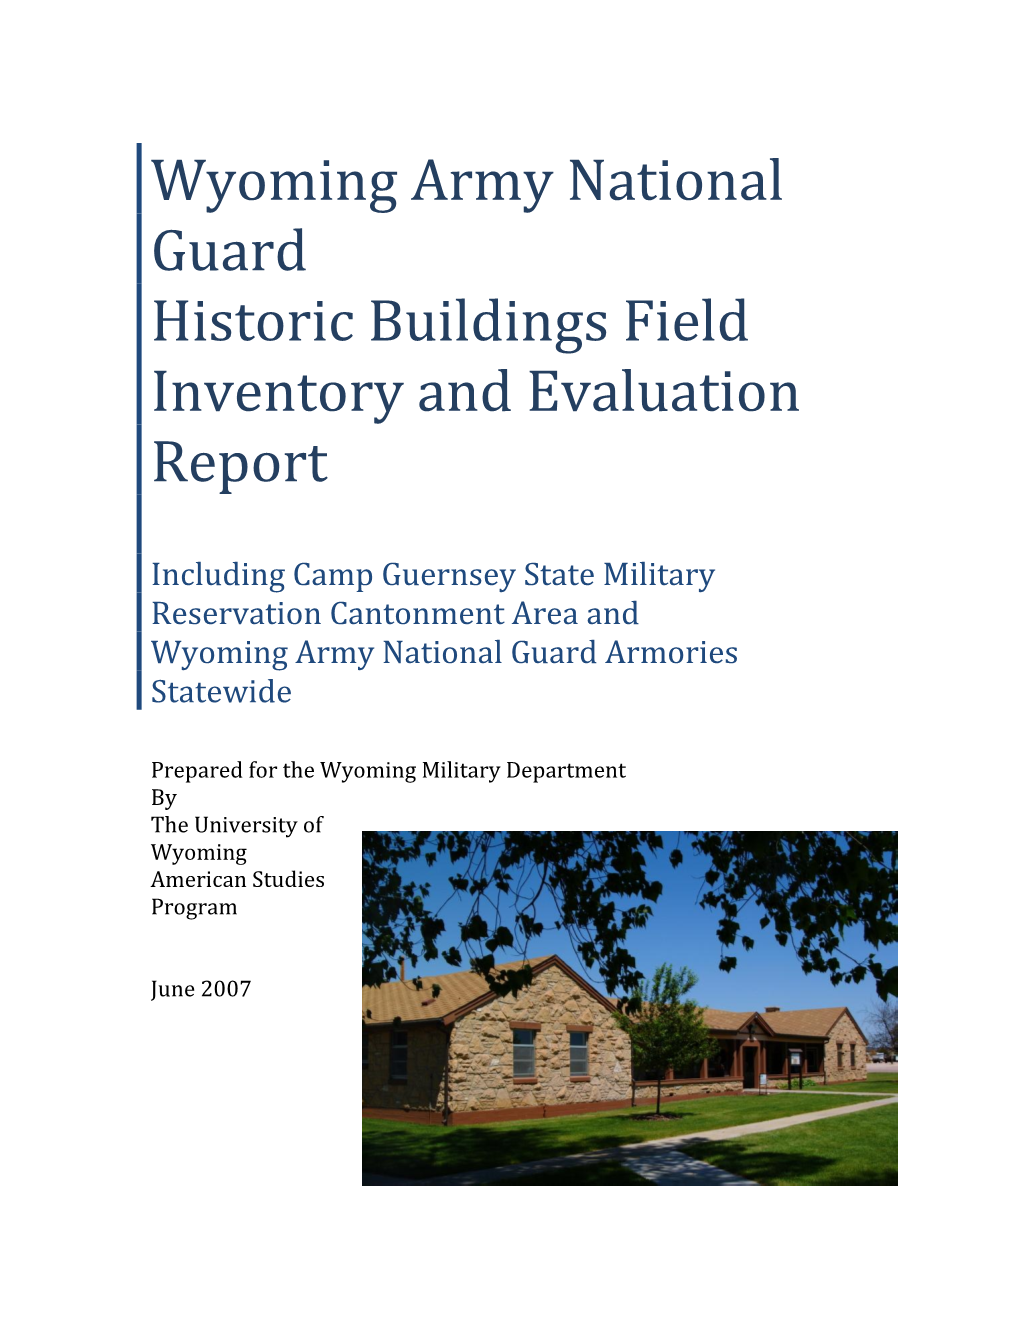 Wyoming Army National Guard Historic Buildings Field Inventory and Evaluation Report